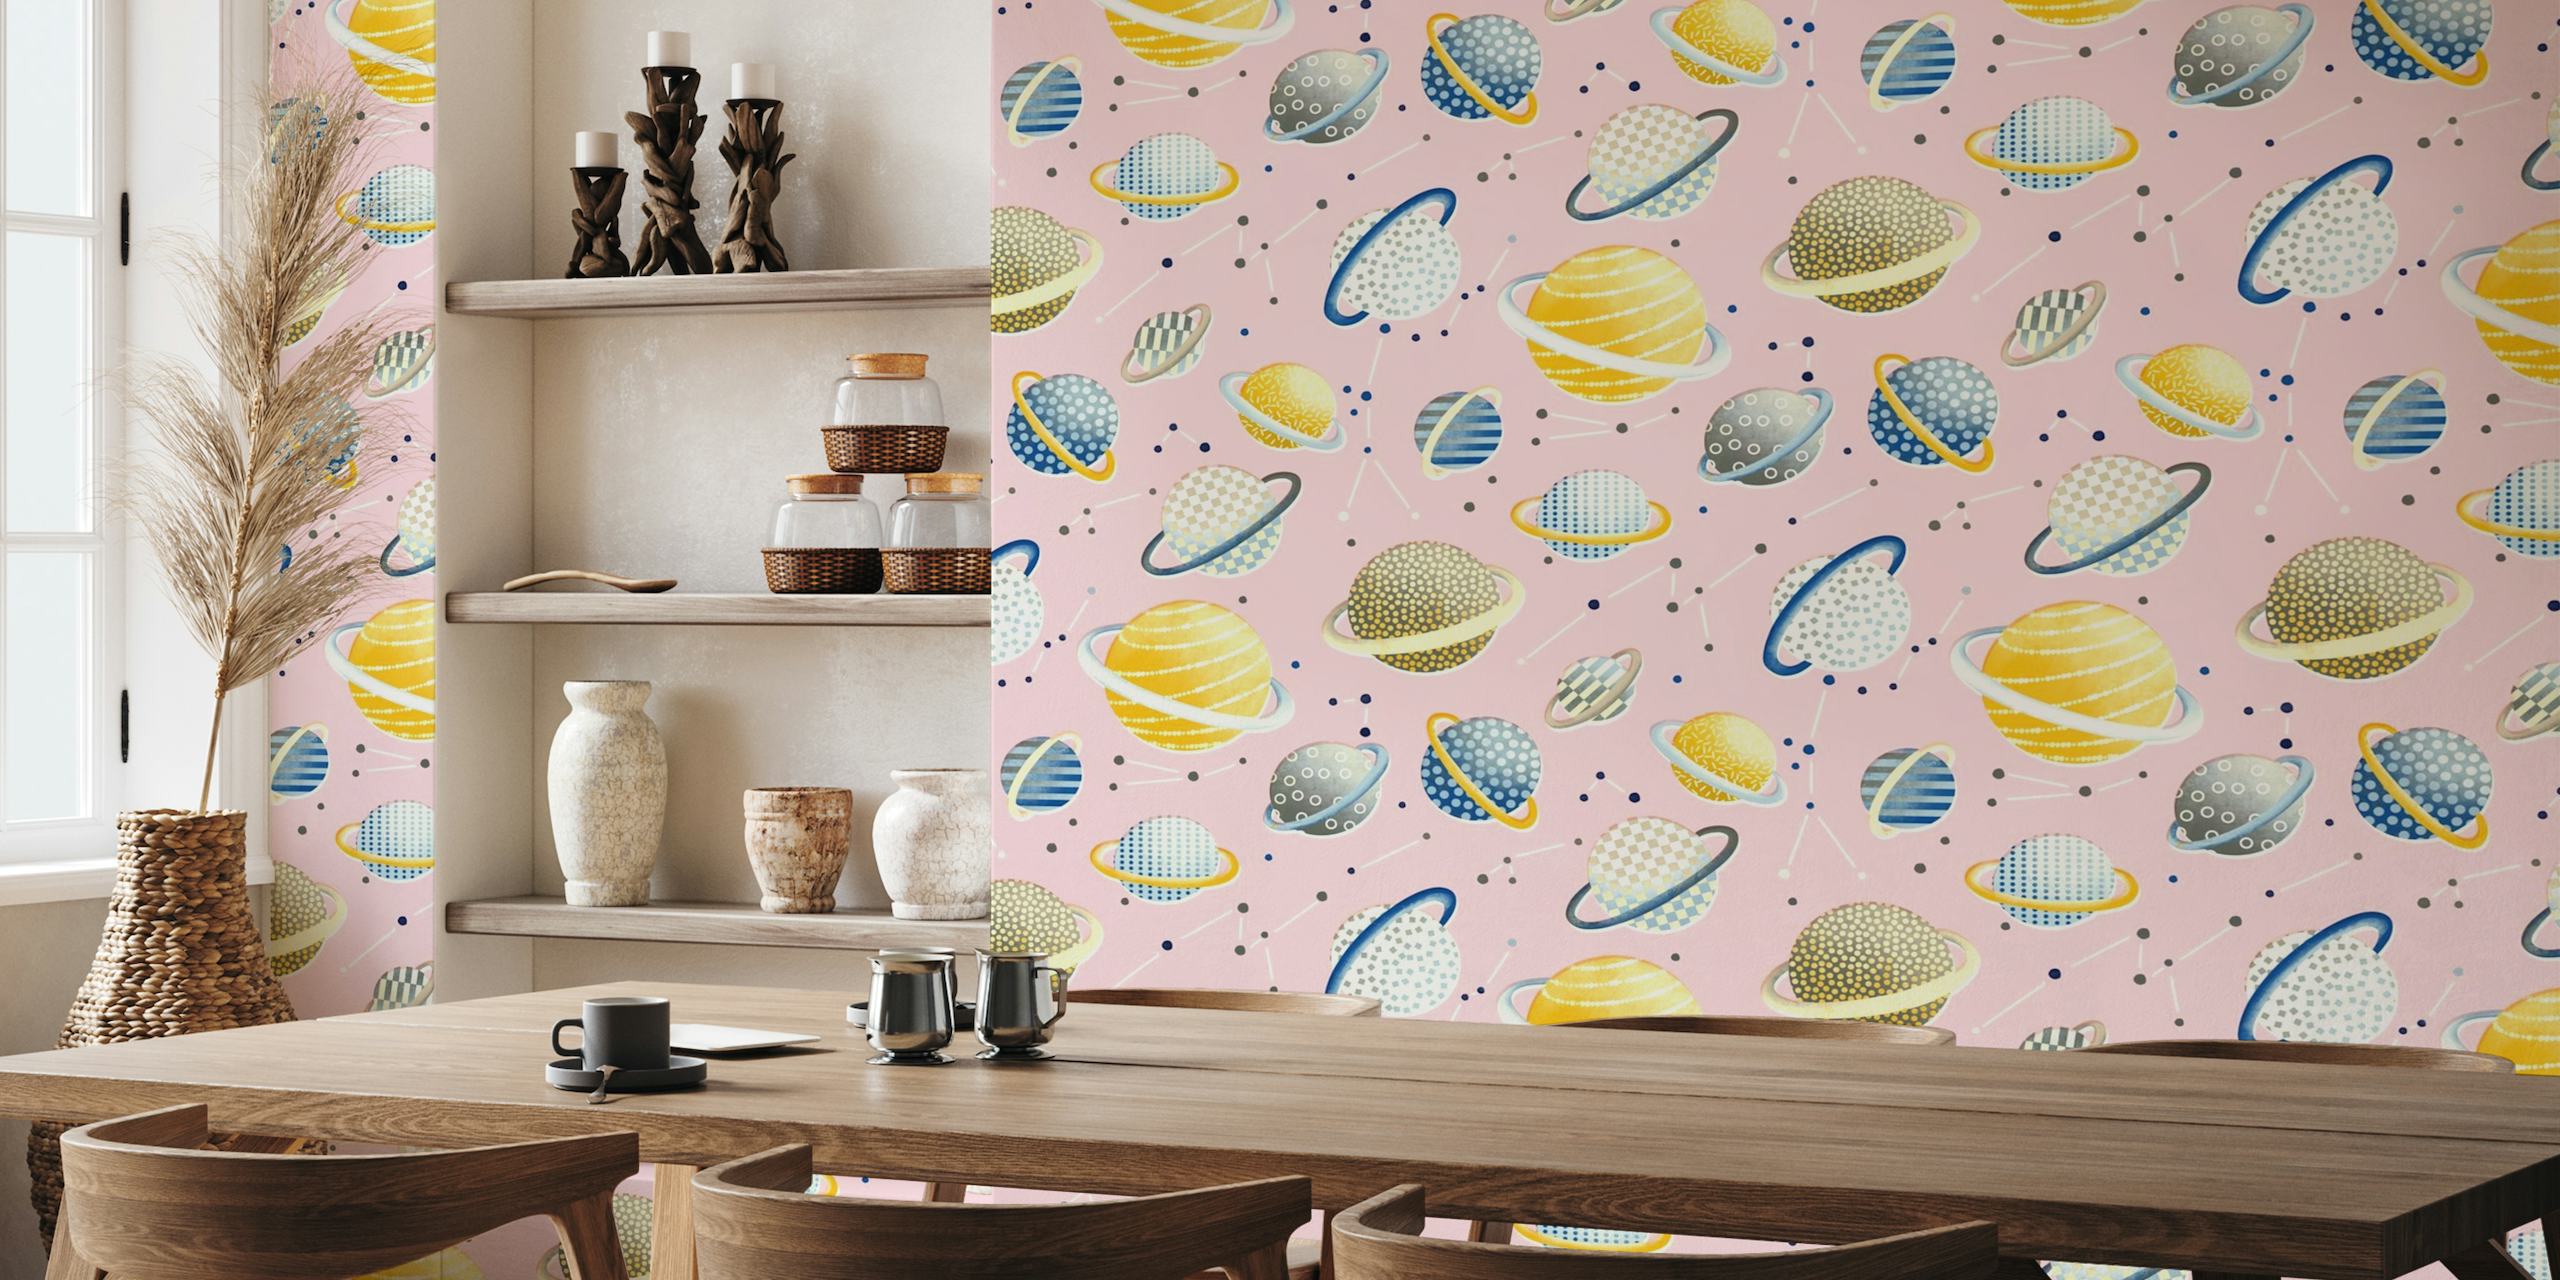 Celestial view of planets and constellations papel de parede